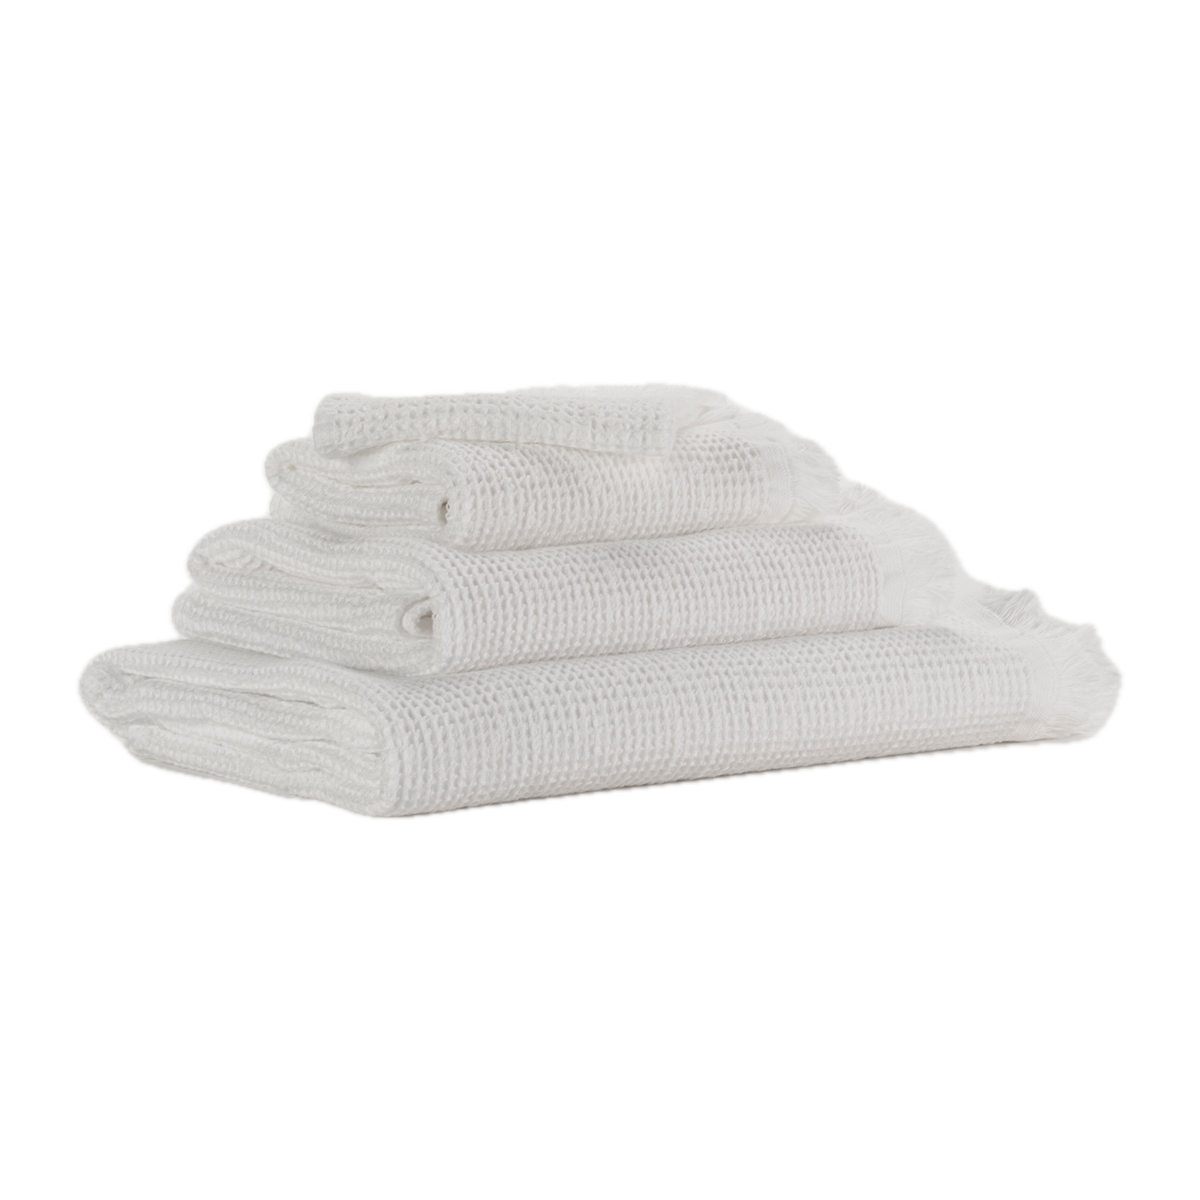 Tilted View of Abyss Bees Bath Towels in White (100) Color